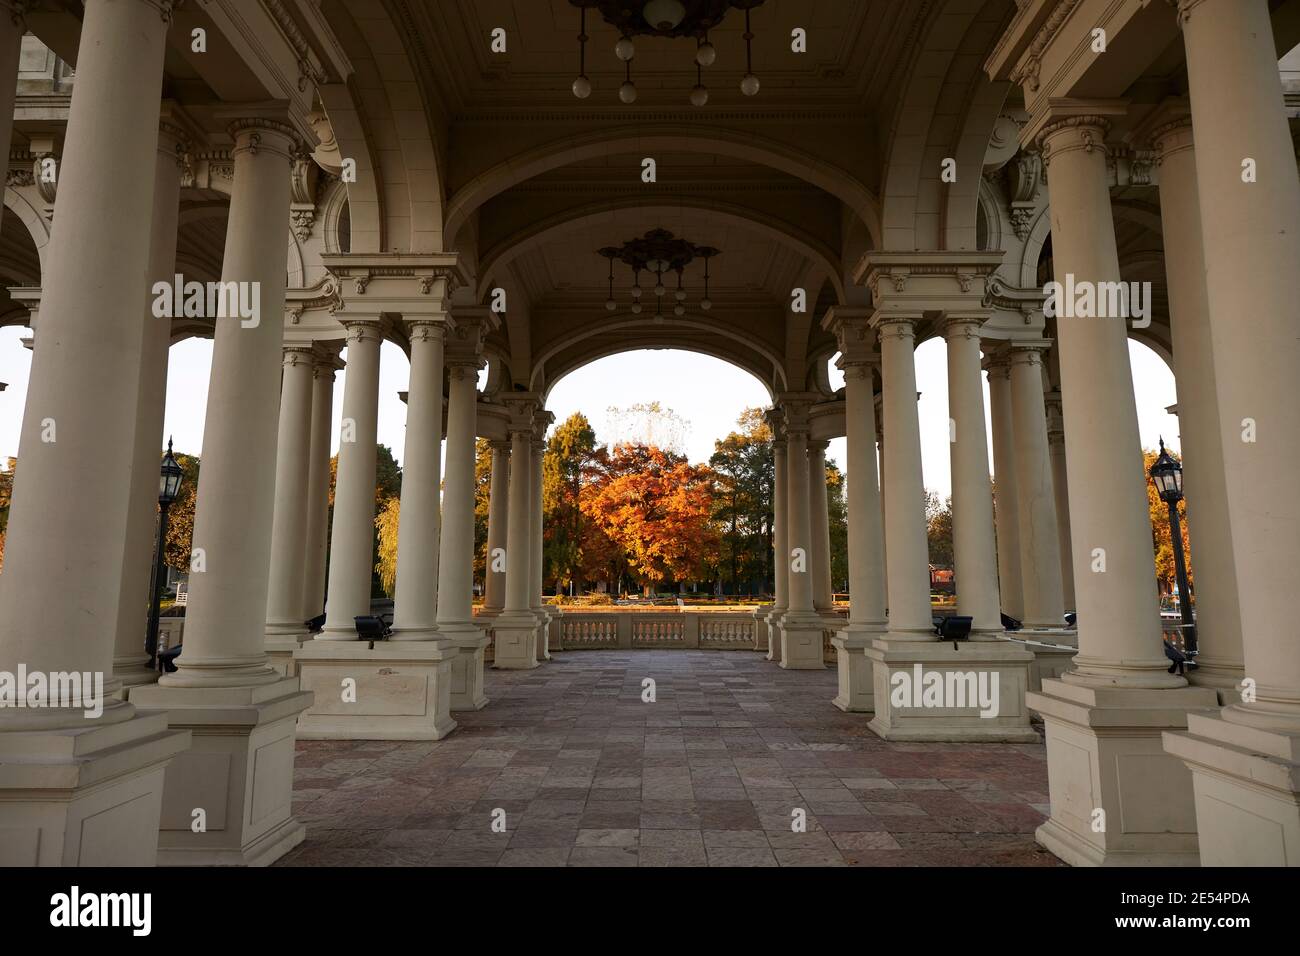 The outdoor pier of the MAT (Museum of Fine Art) in autumn, overlooking the Lujan River, Tigre, Buenos Aires, Argentina. Stock Photo